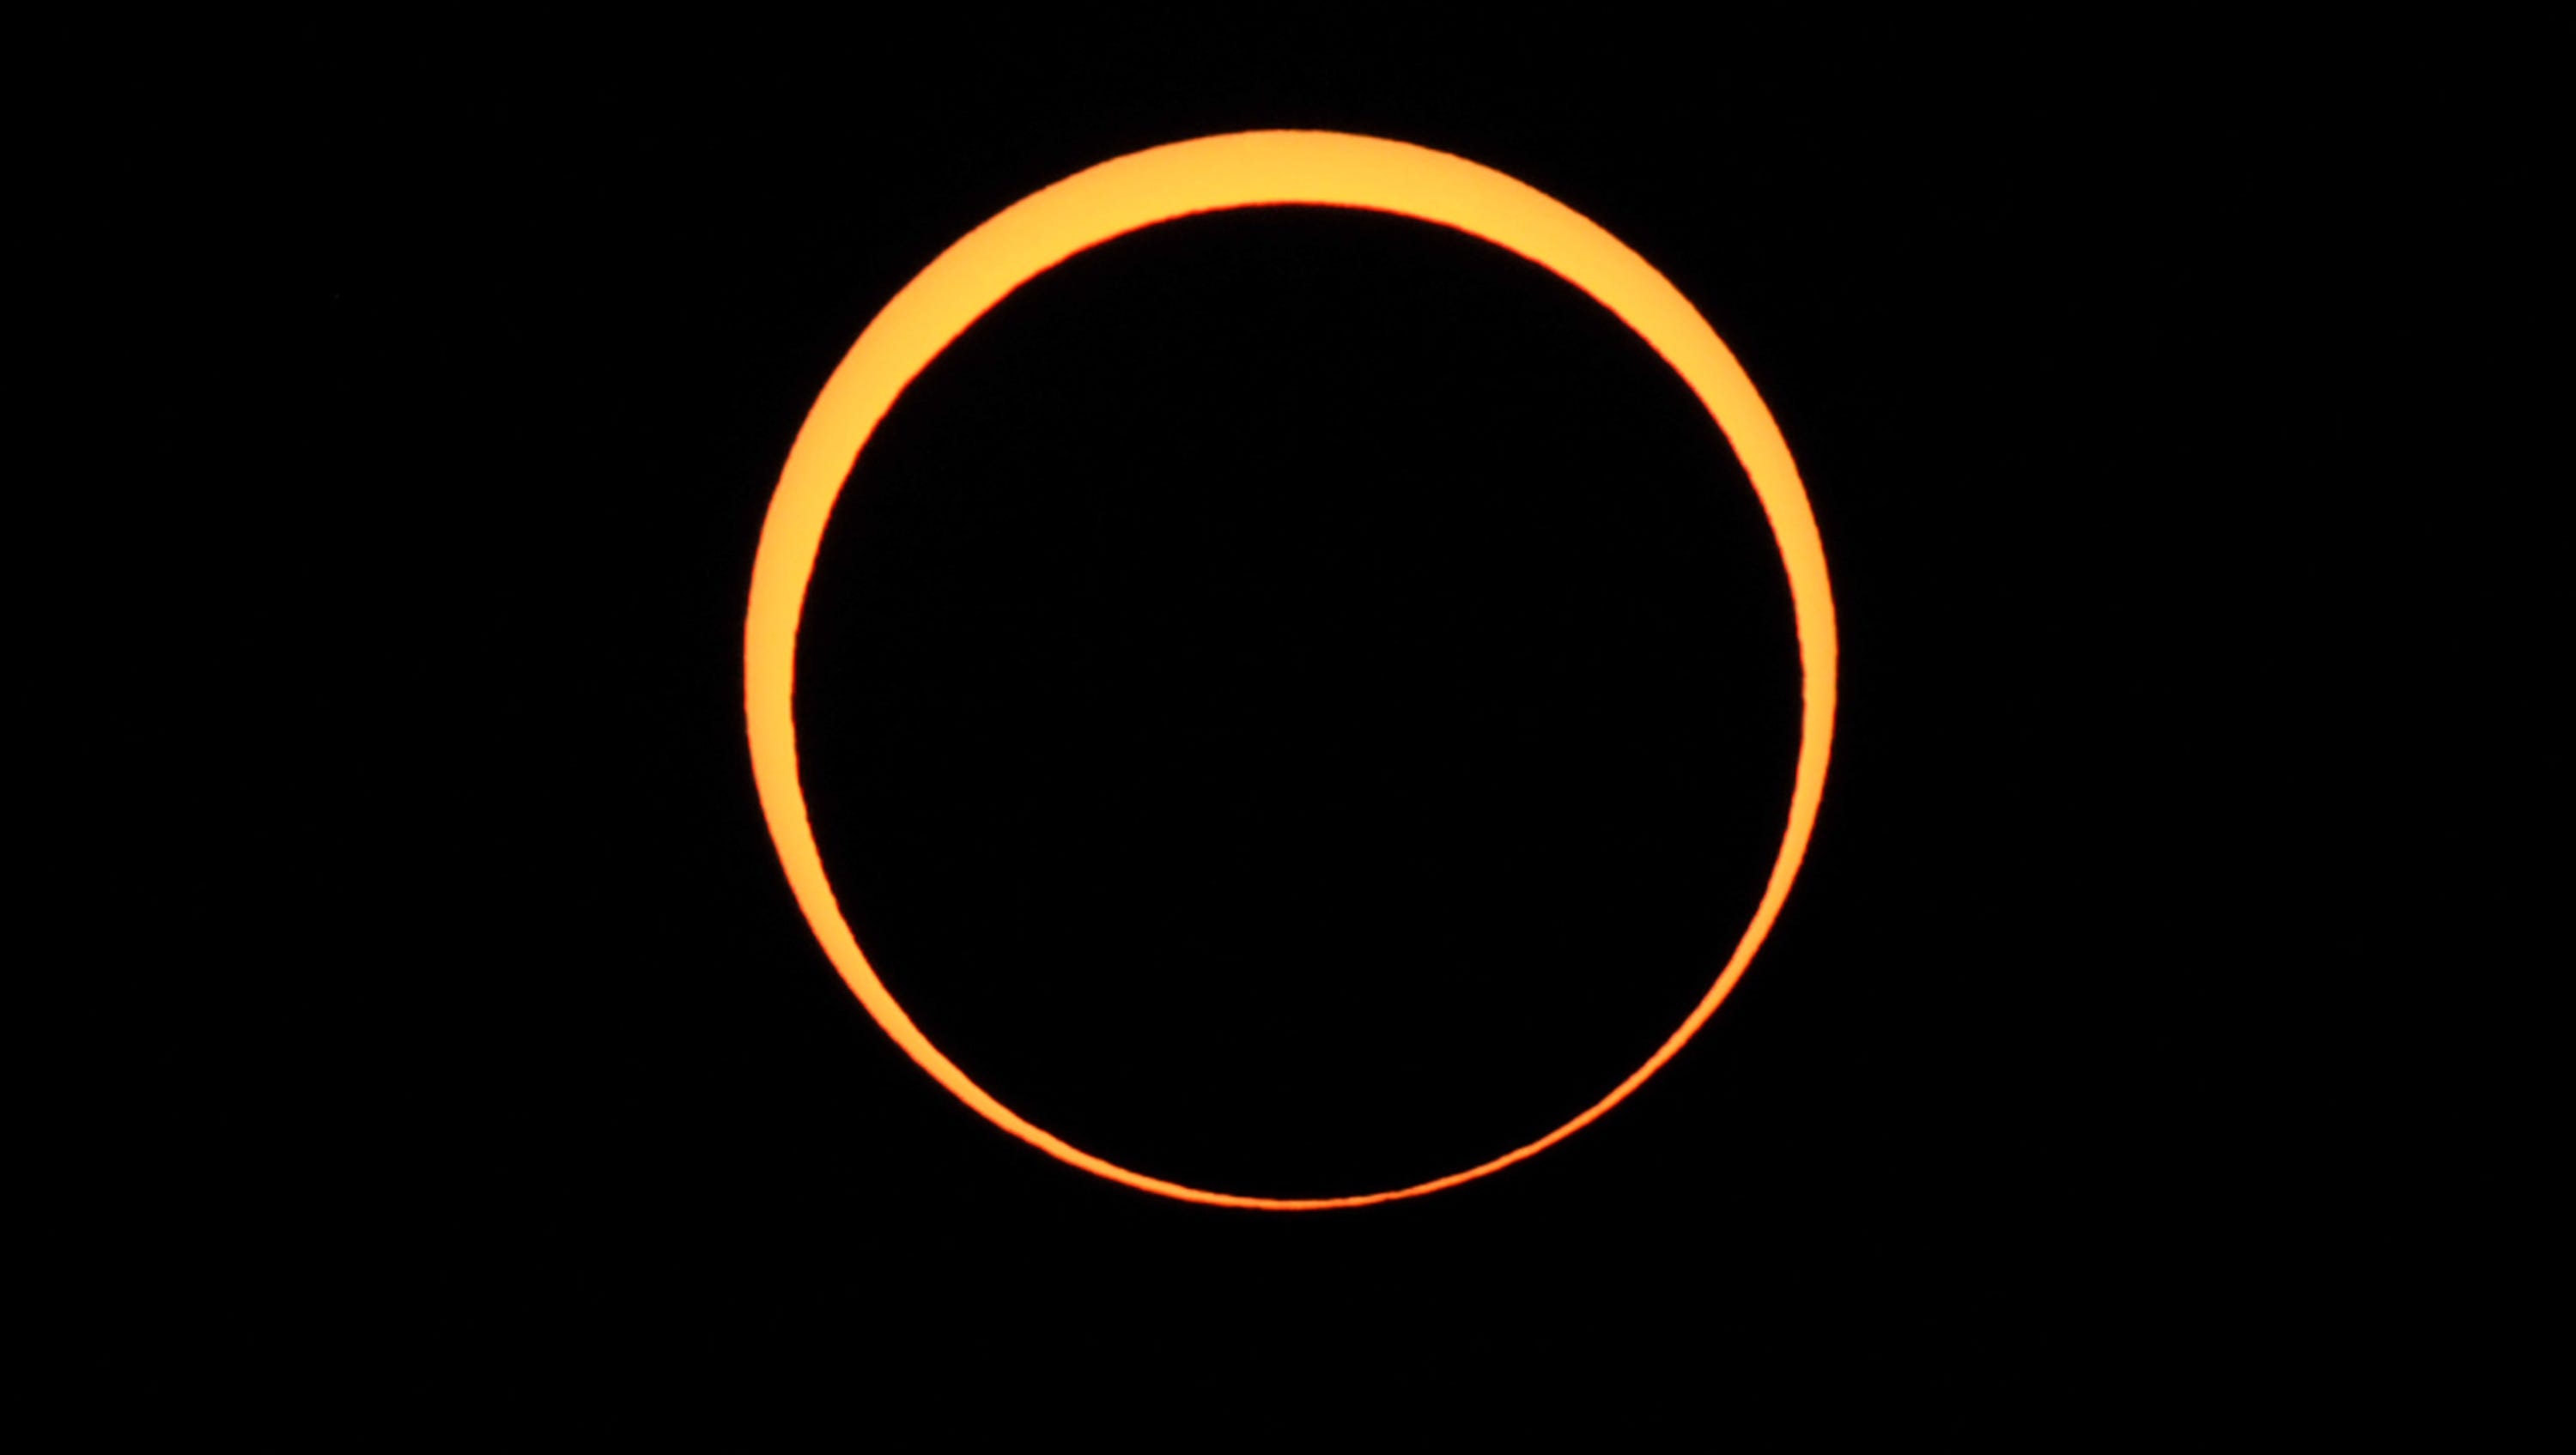 Solar eclipse 'Ring of fire' annular eclipse coming to Africa, Asia